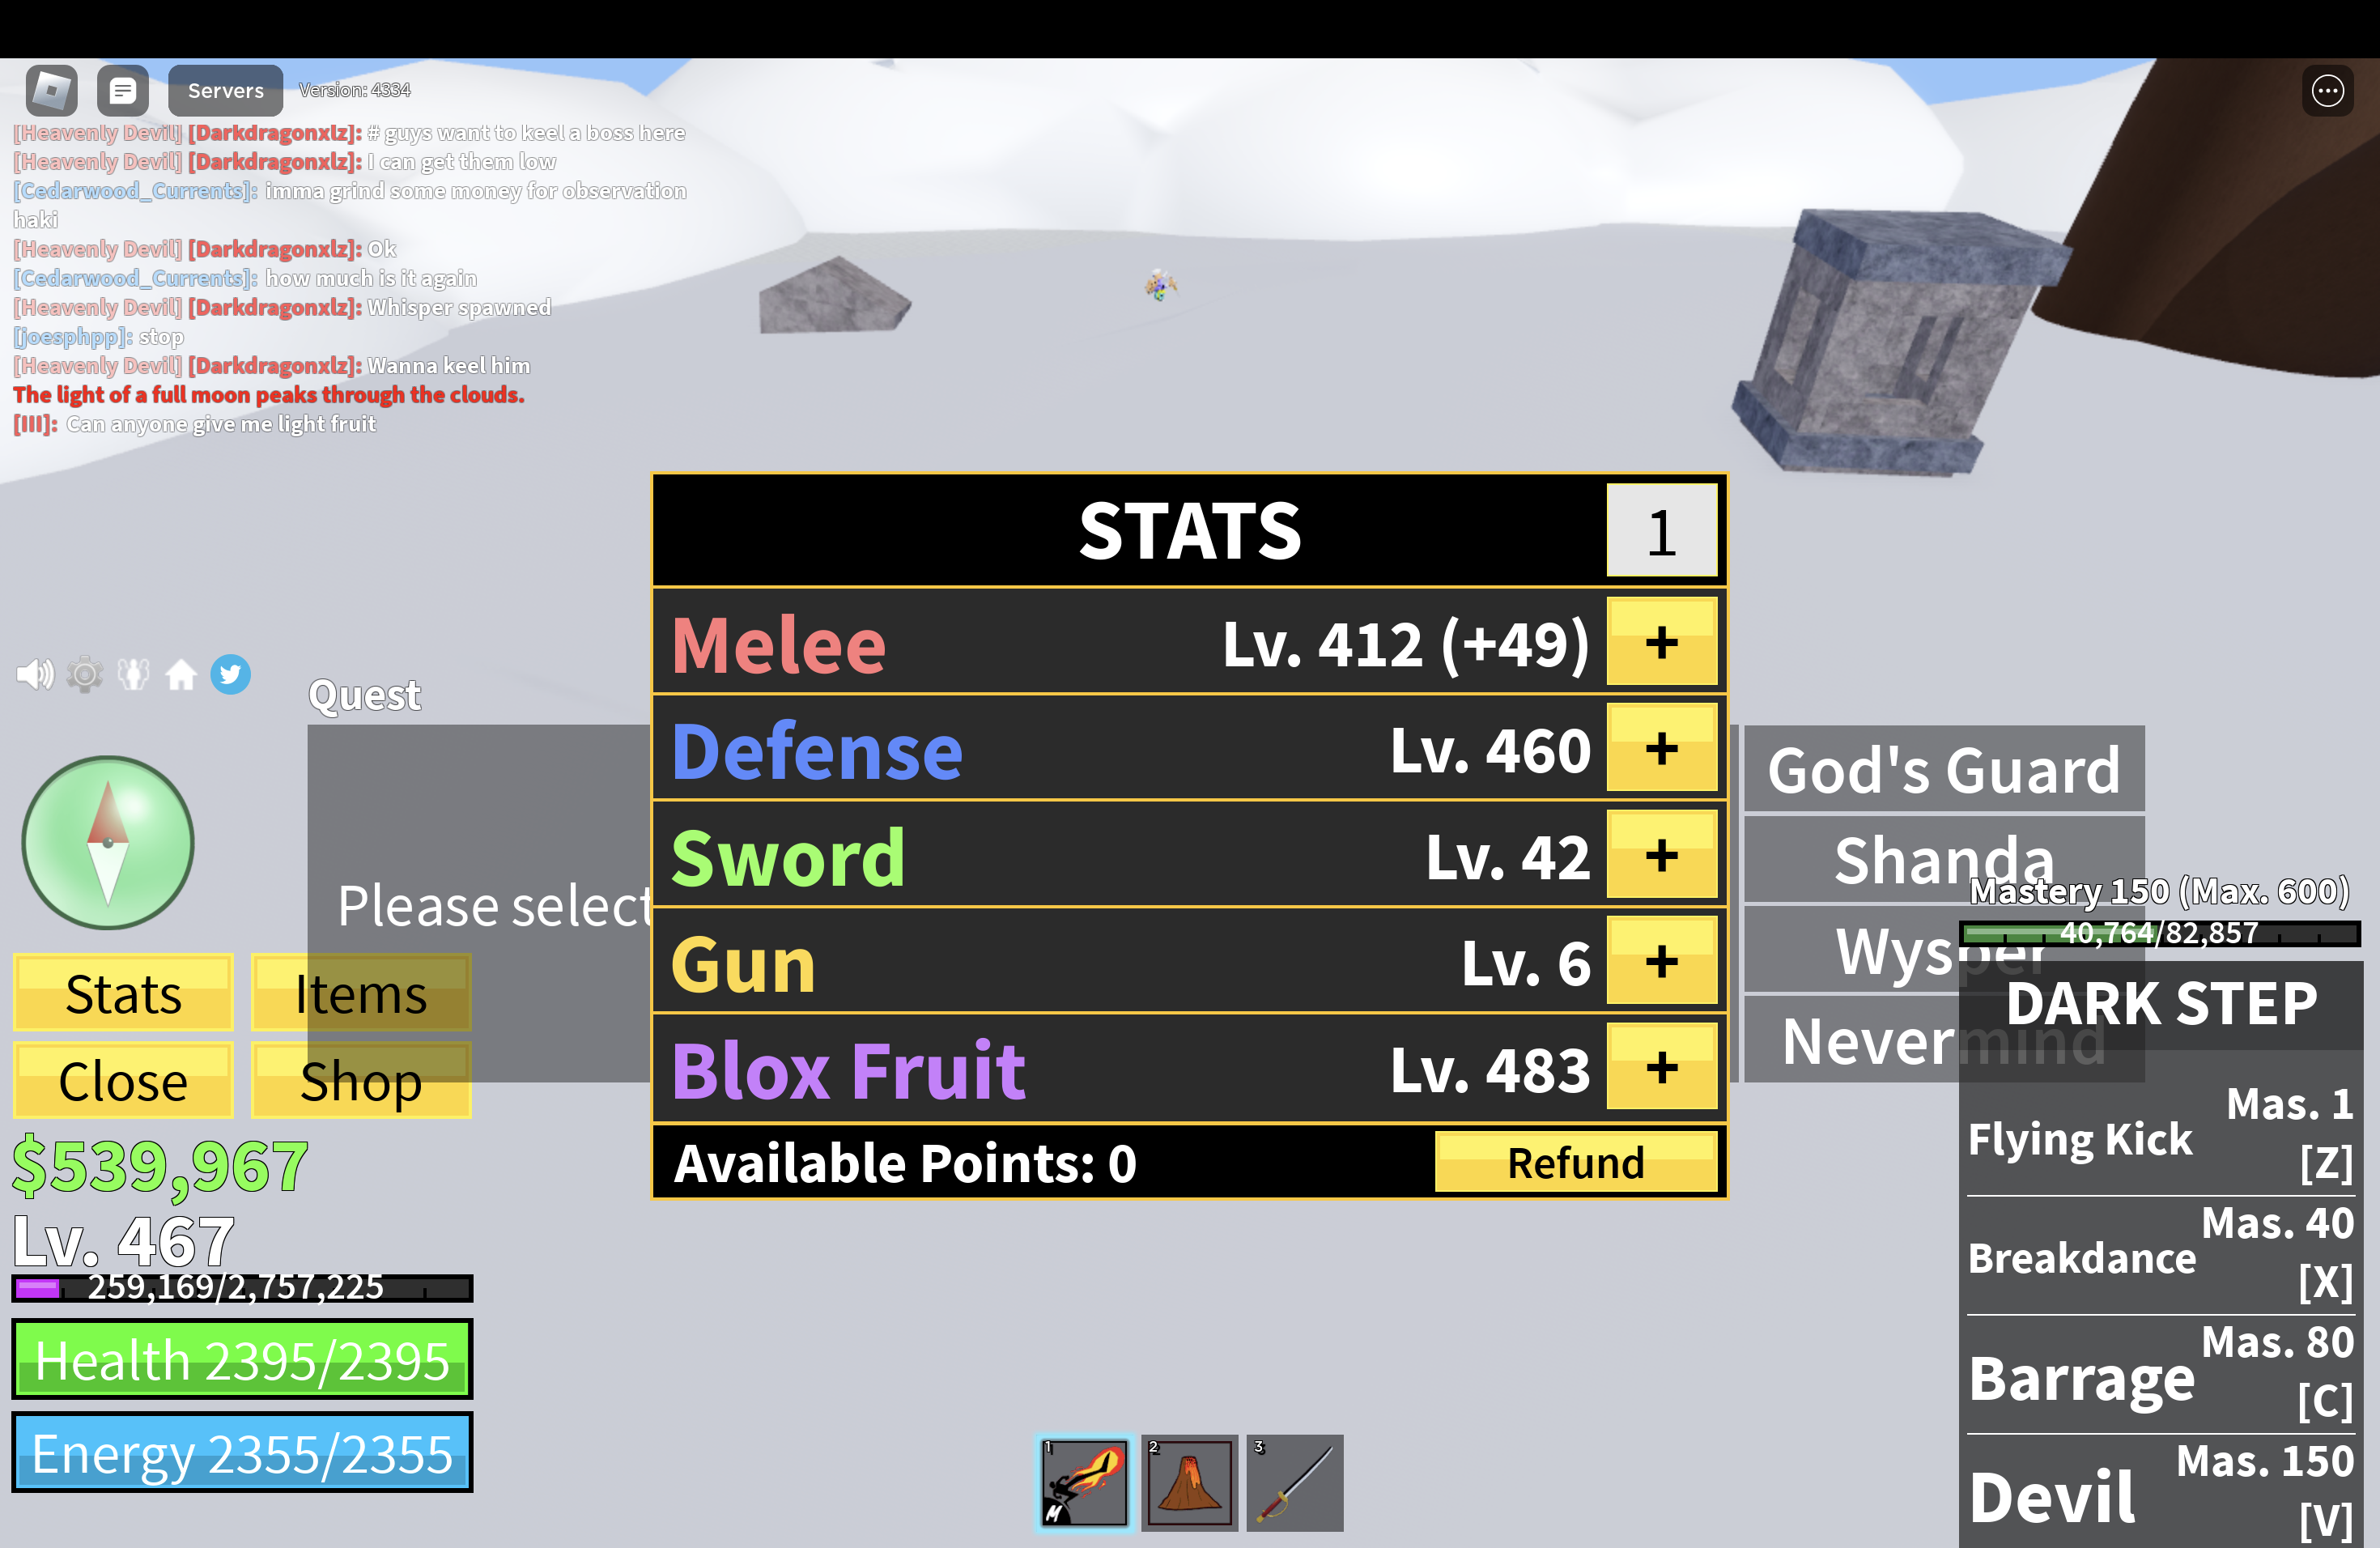 Are my stats good enough